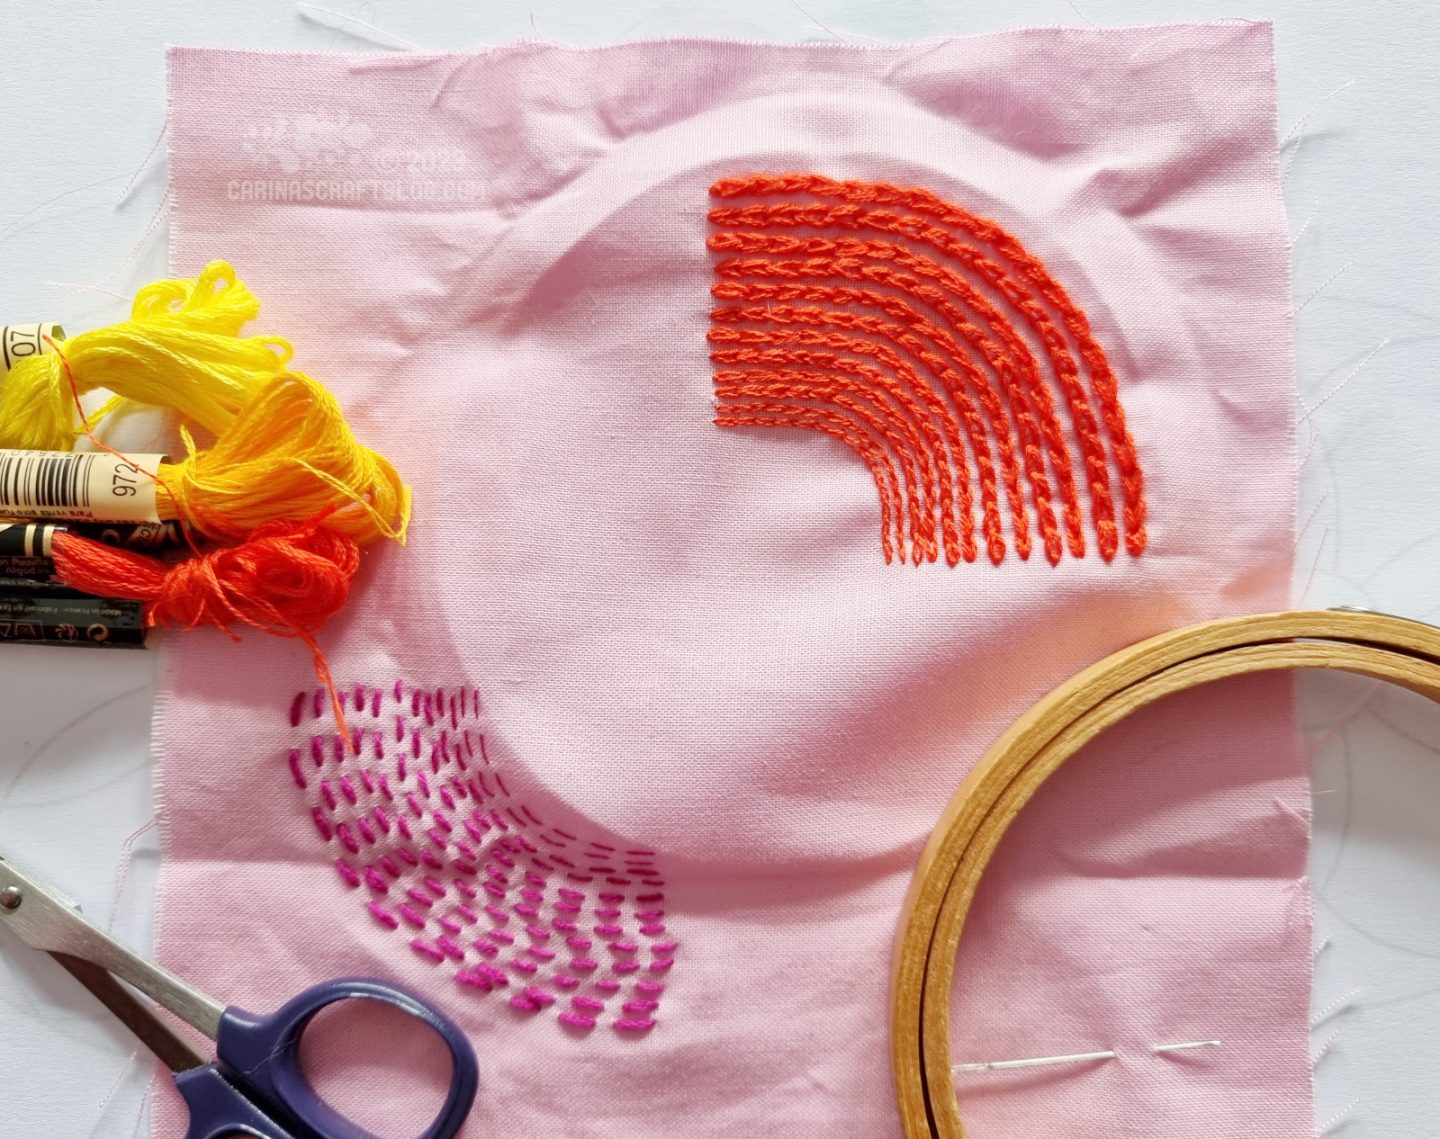 A light pink square of fabric is stitched in two rainbow shapes. An orange shape in the upper right corner and a magenta shape in the lower left corner.